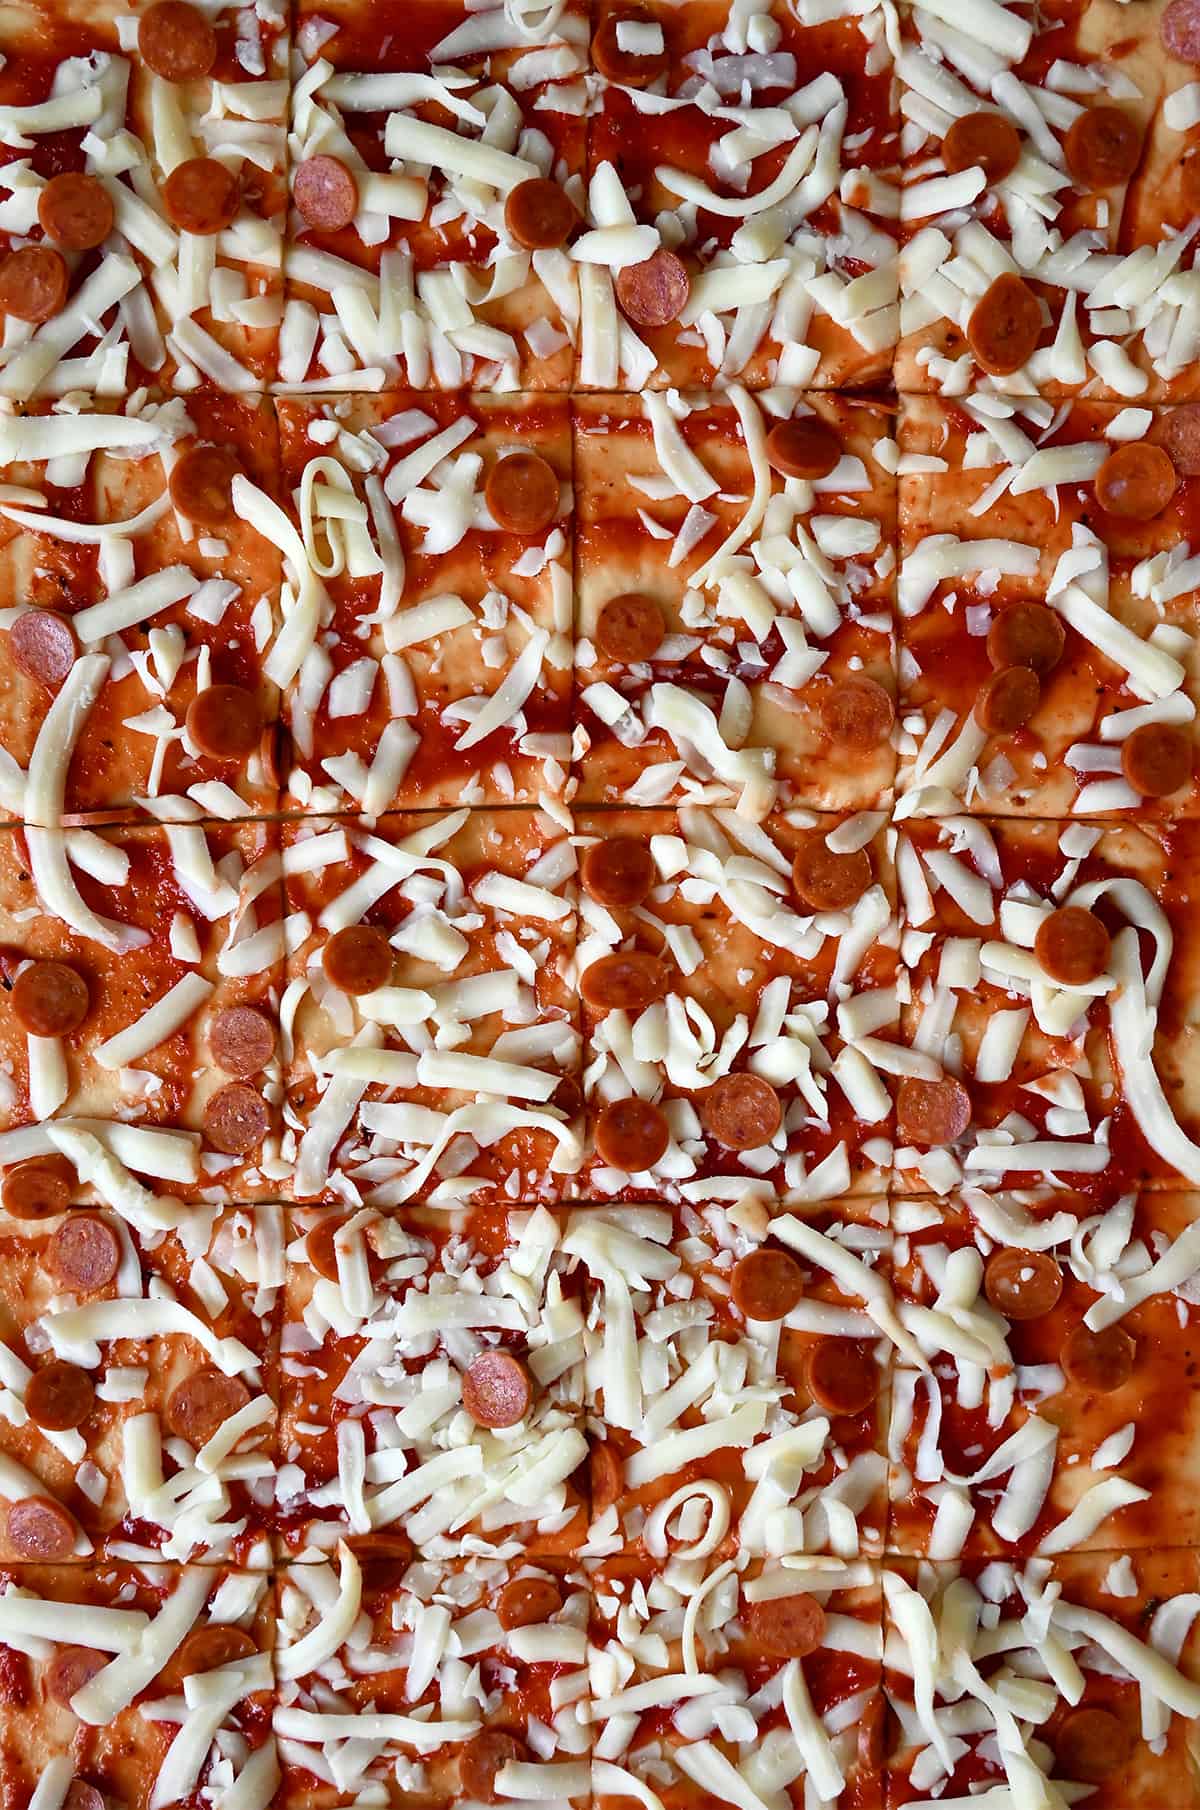 Pizza dough topped with marinara sauce, shredded cheese and mini pepperoni sliced into uniform pieces.